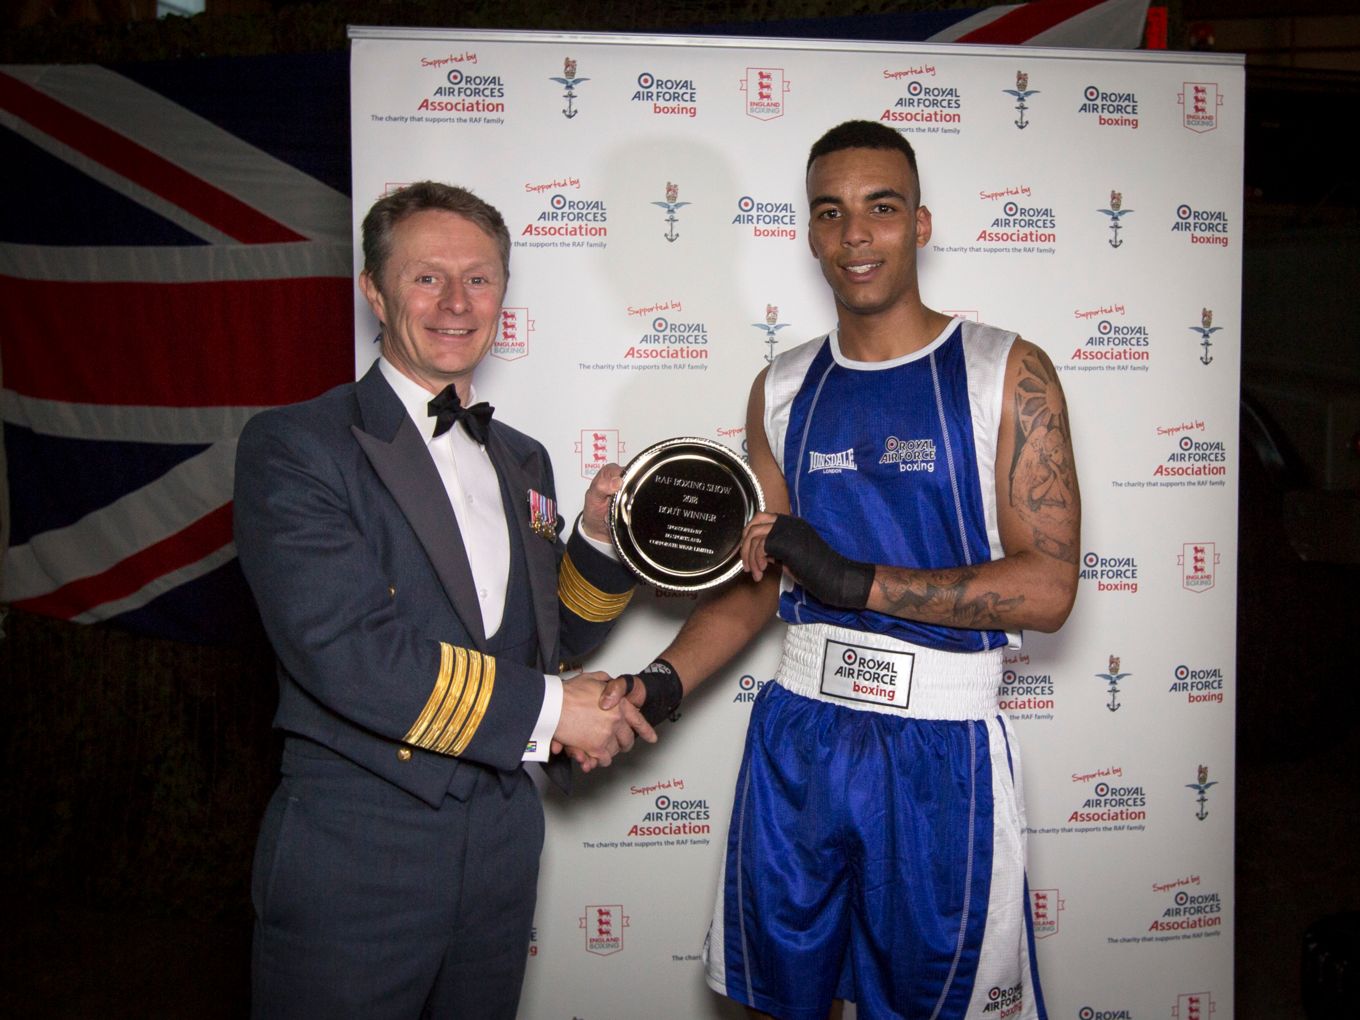 Group Captain Tony Keeling presents a trophy to the winner of the first bout, Senior Aircraftman Bright from RAF Leeming